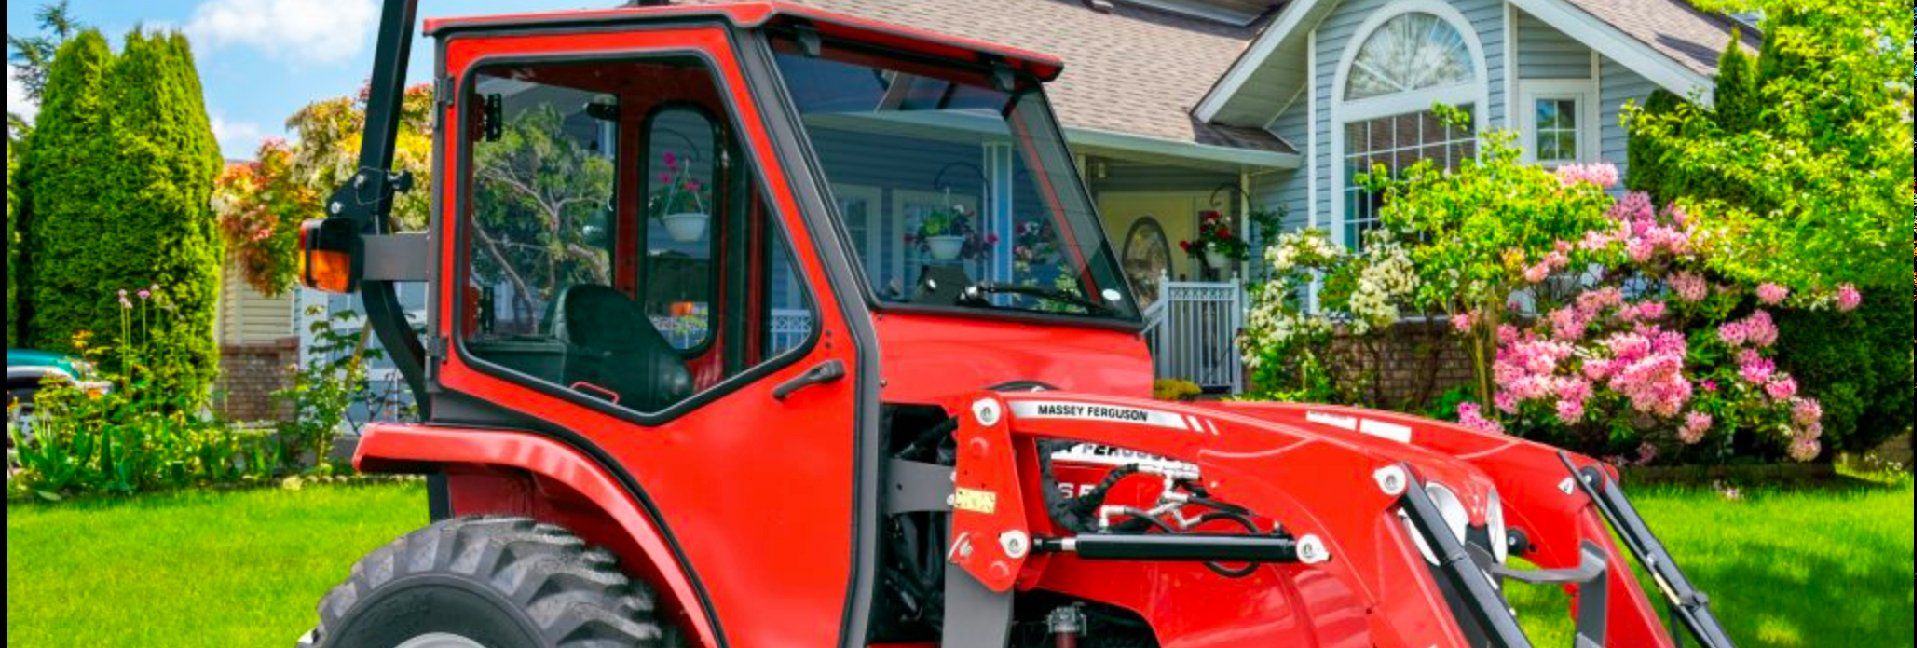 Curtis Industries Introduces All-Steel Cab for the Massey Ferguson 1700E Series Compact Tractor